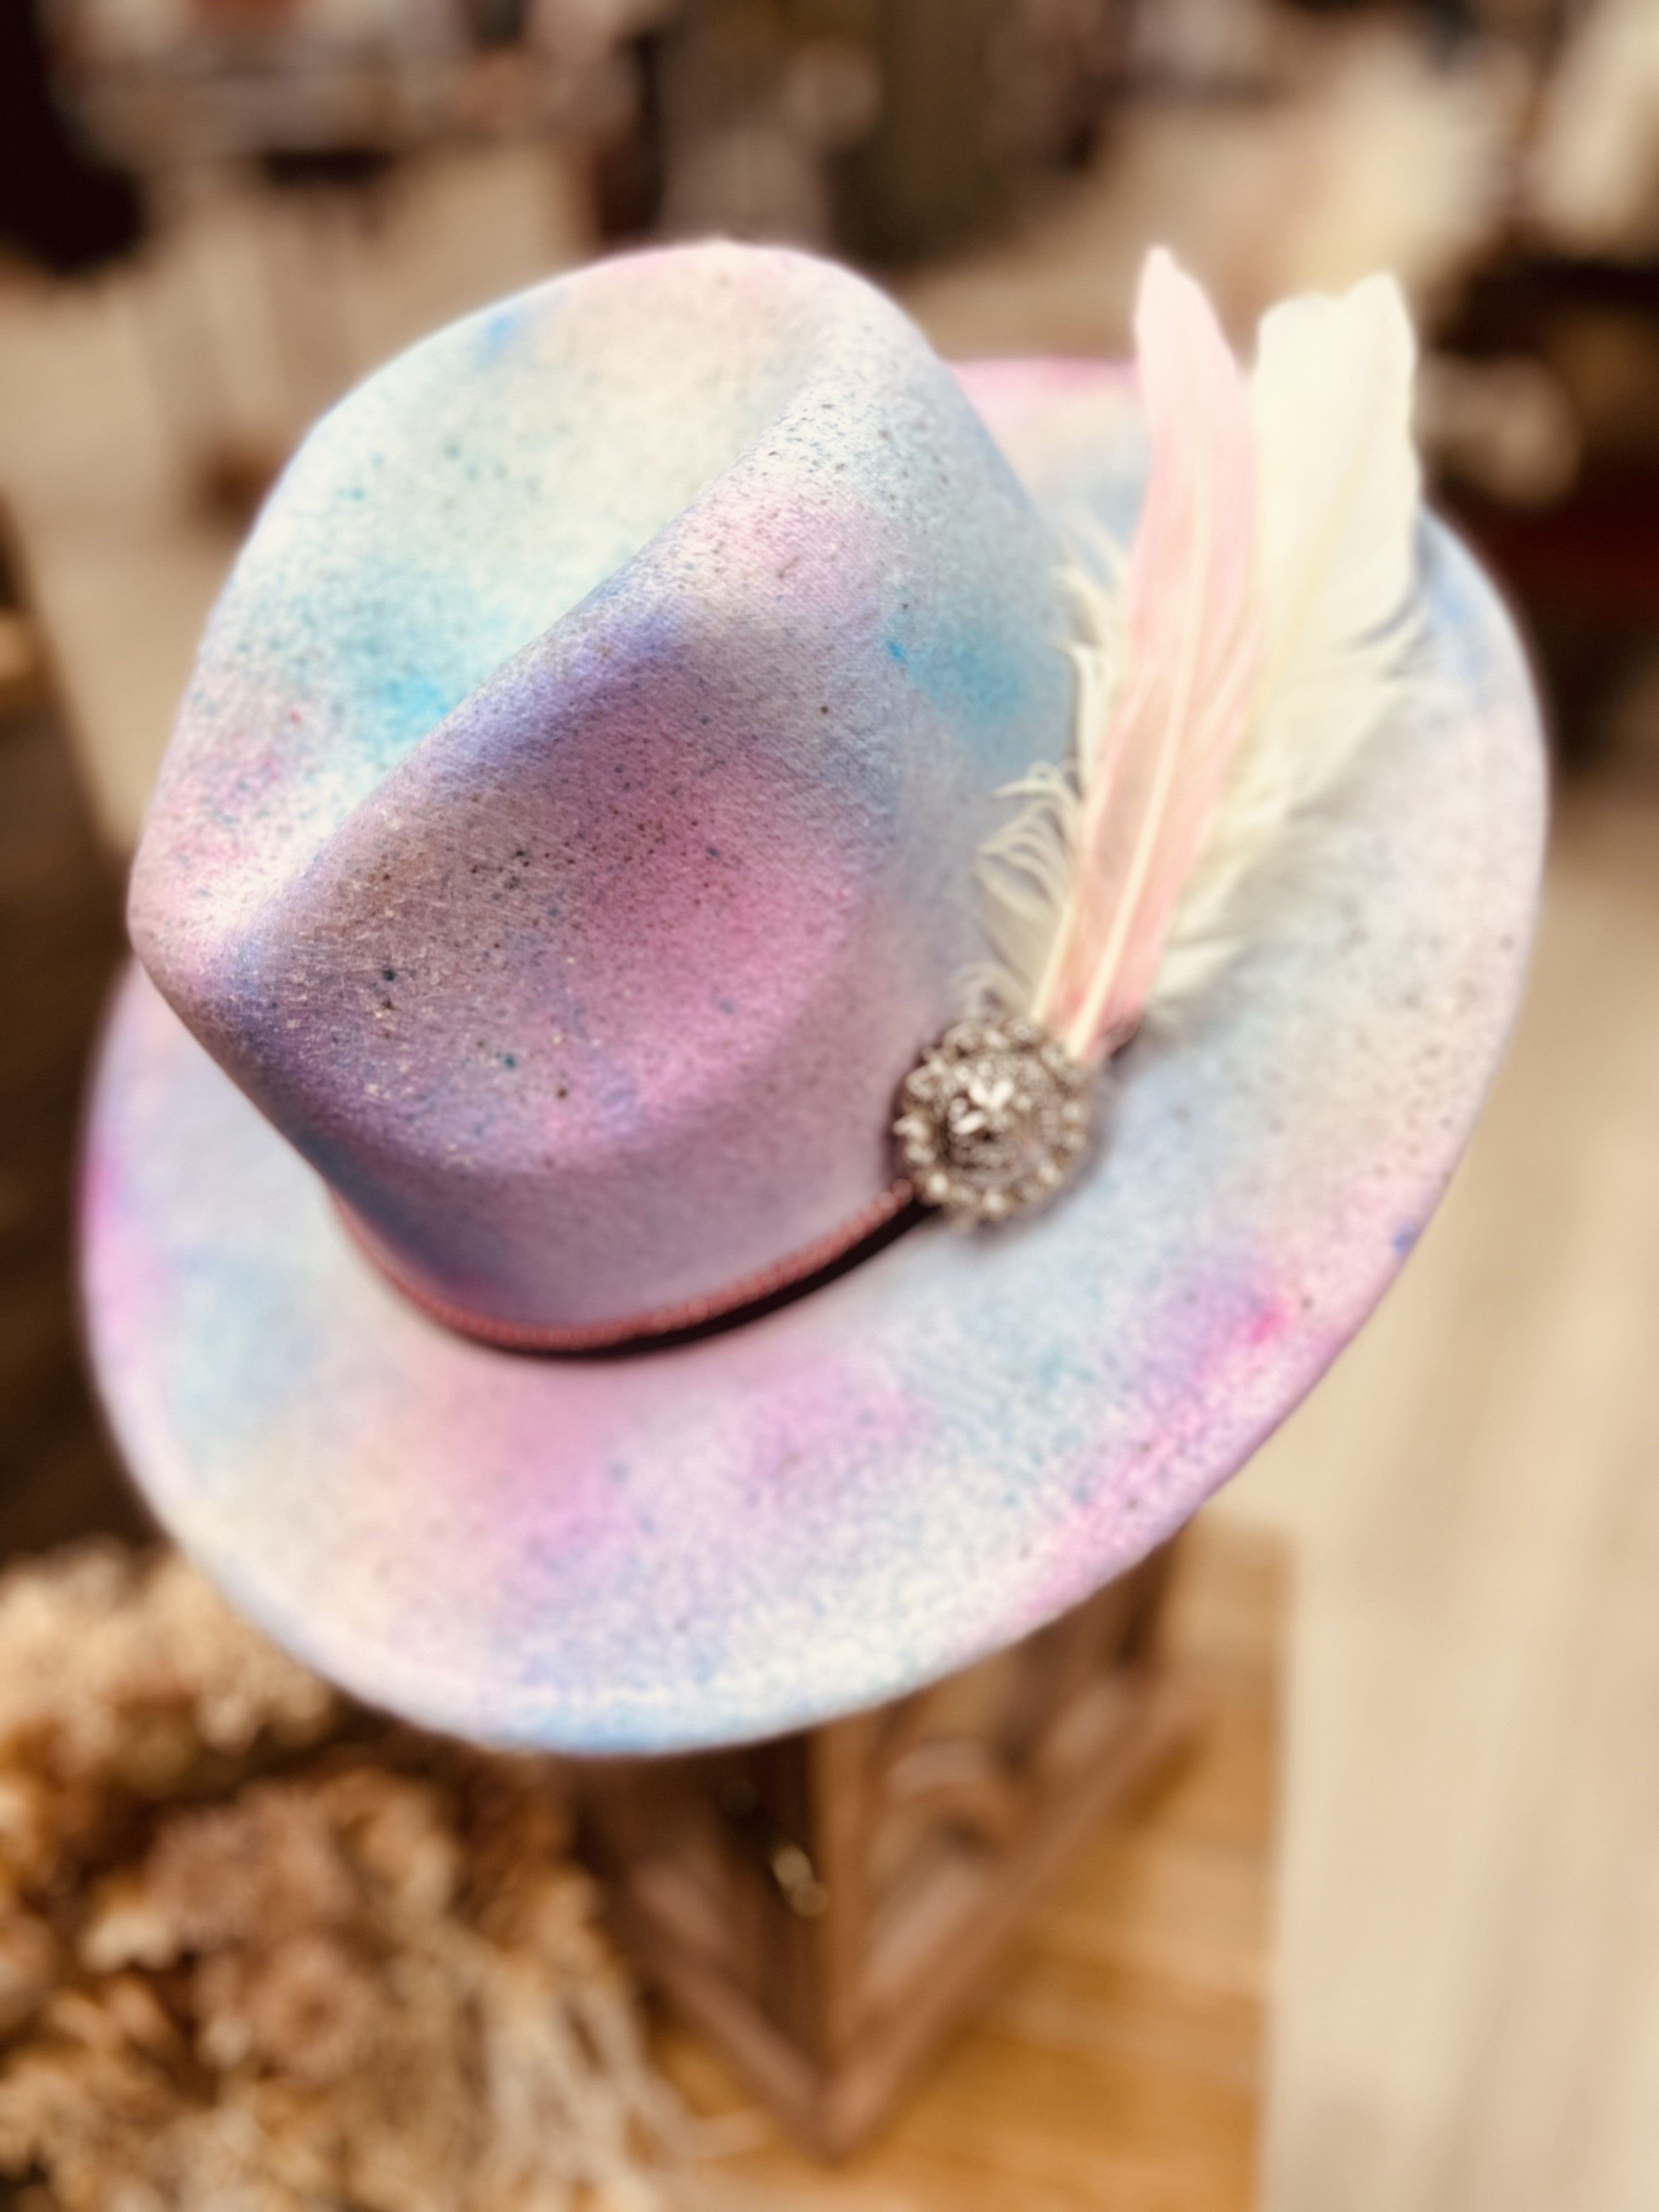 The Cotton Candy Fedora